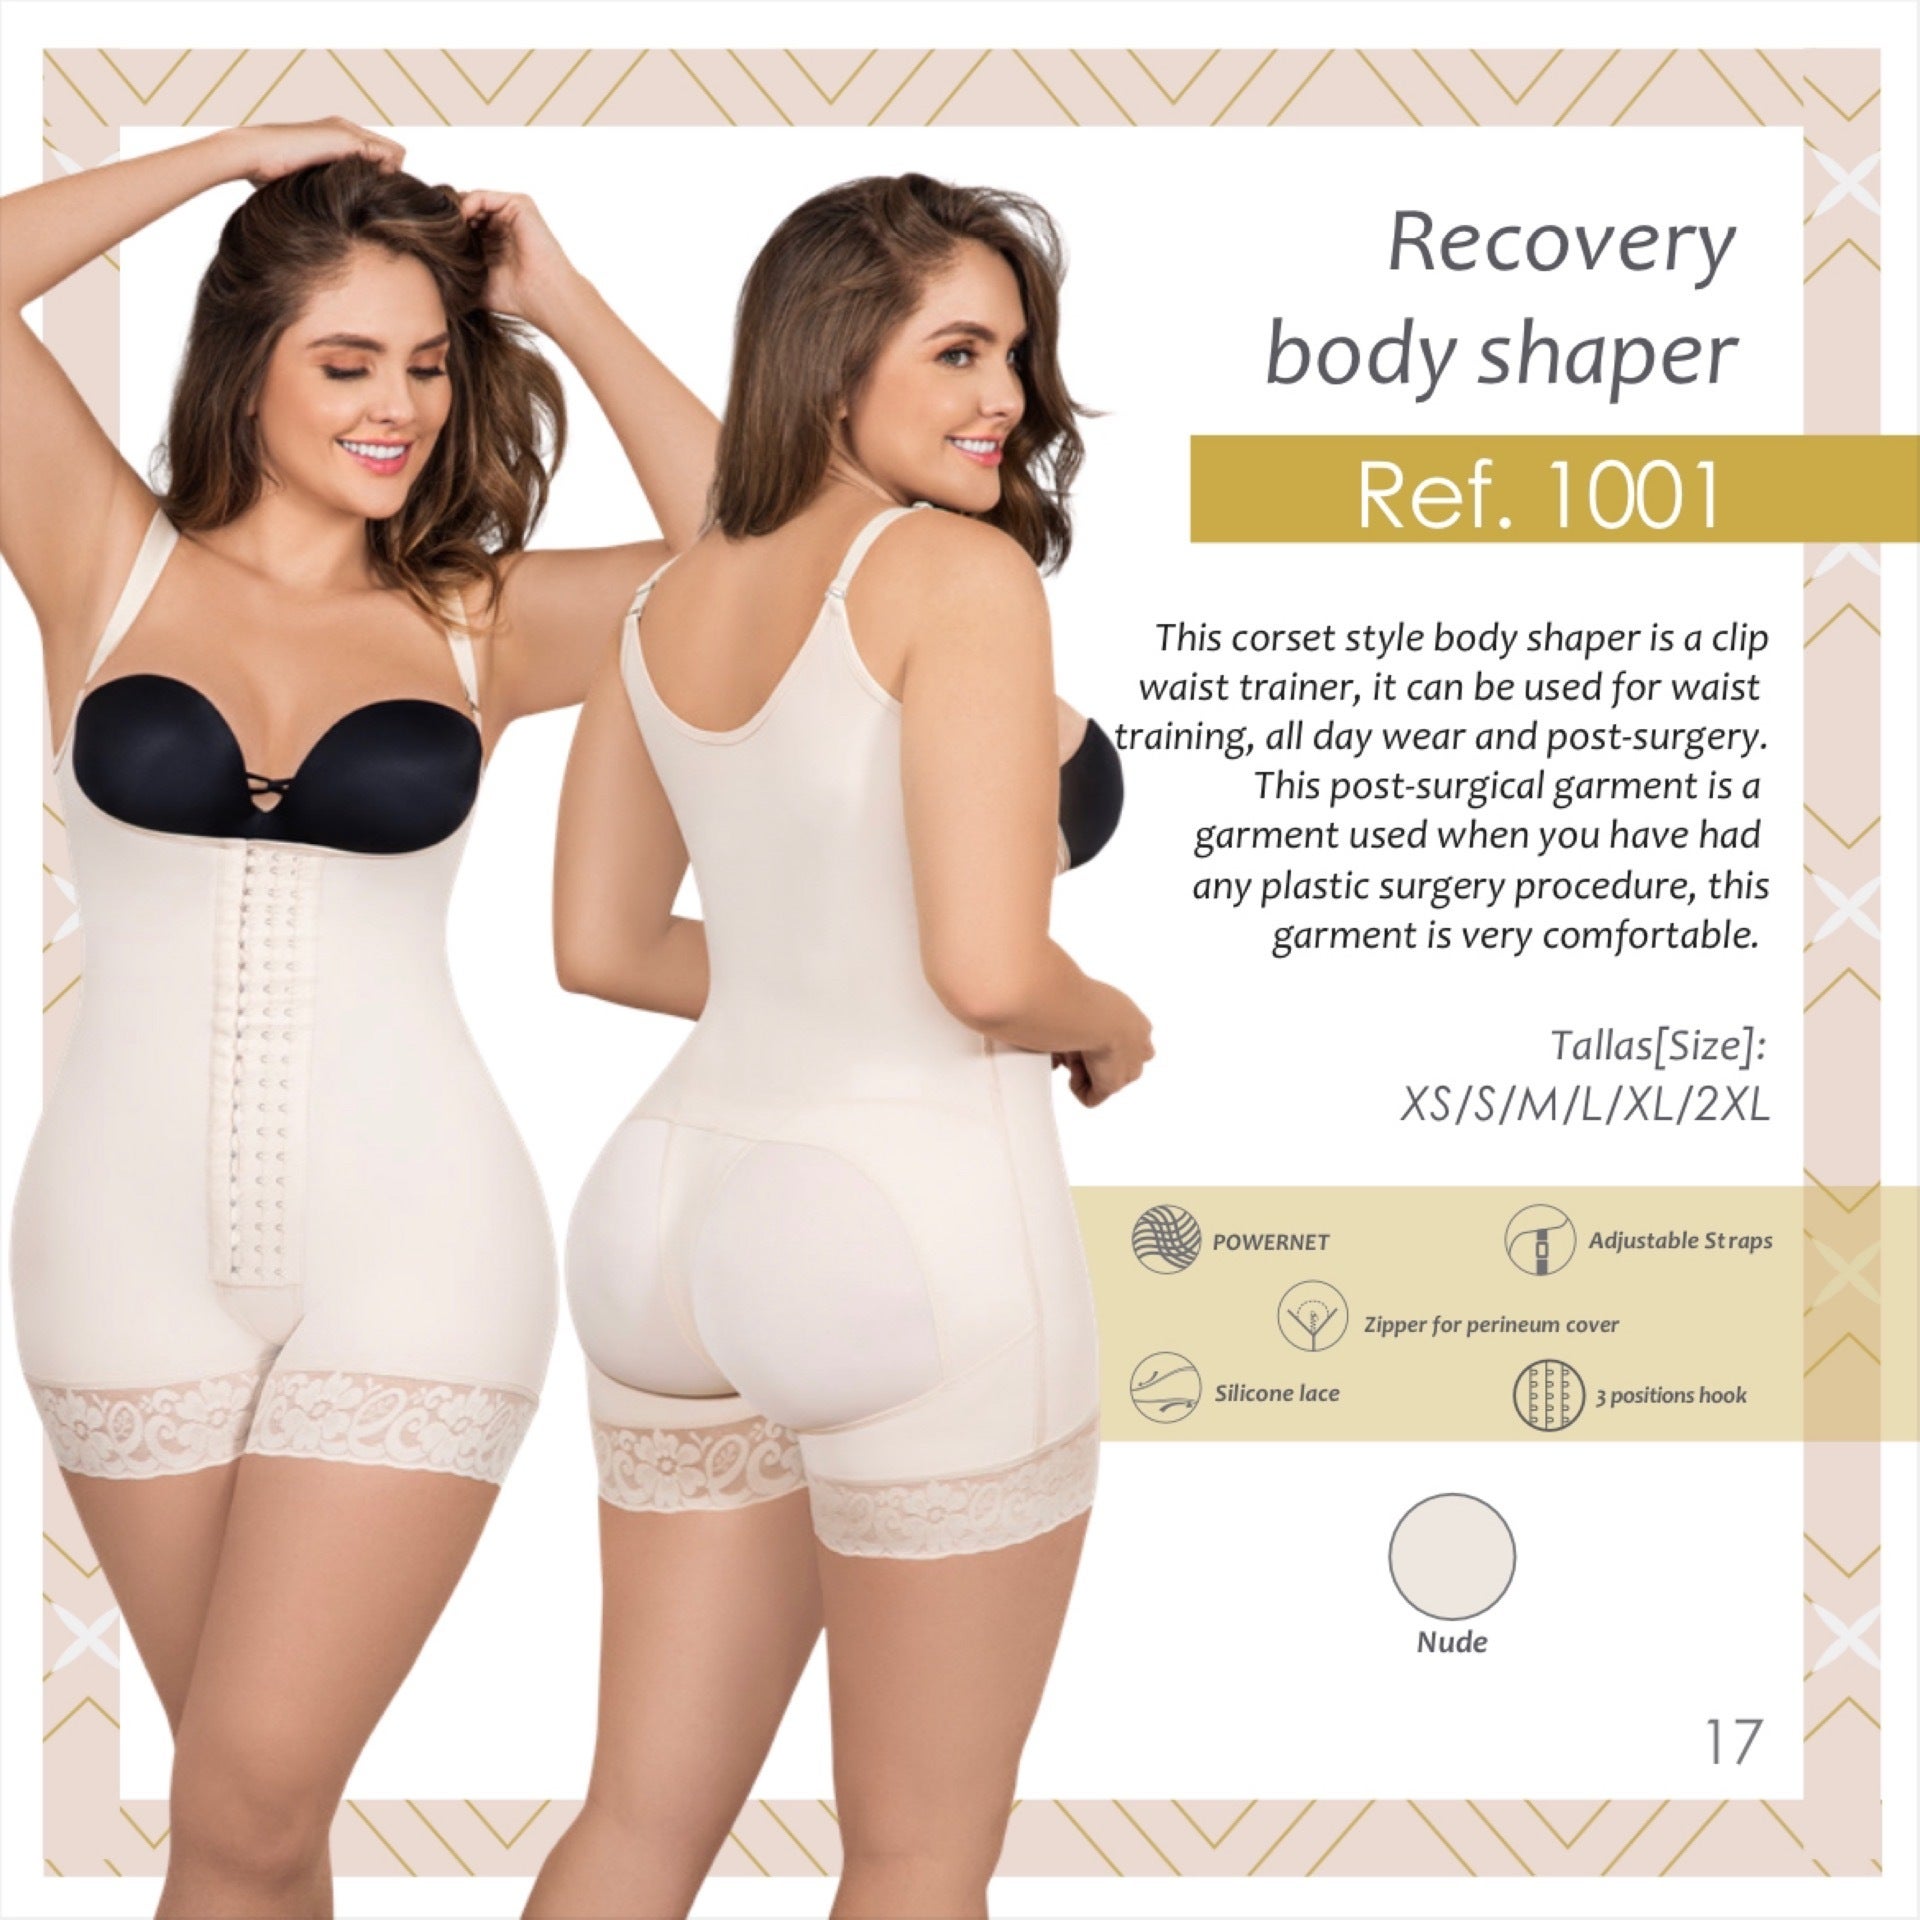 1001 SILHOUETTE & CURVES RECOVERY BODY SHAPER.